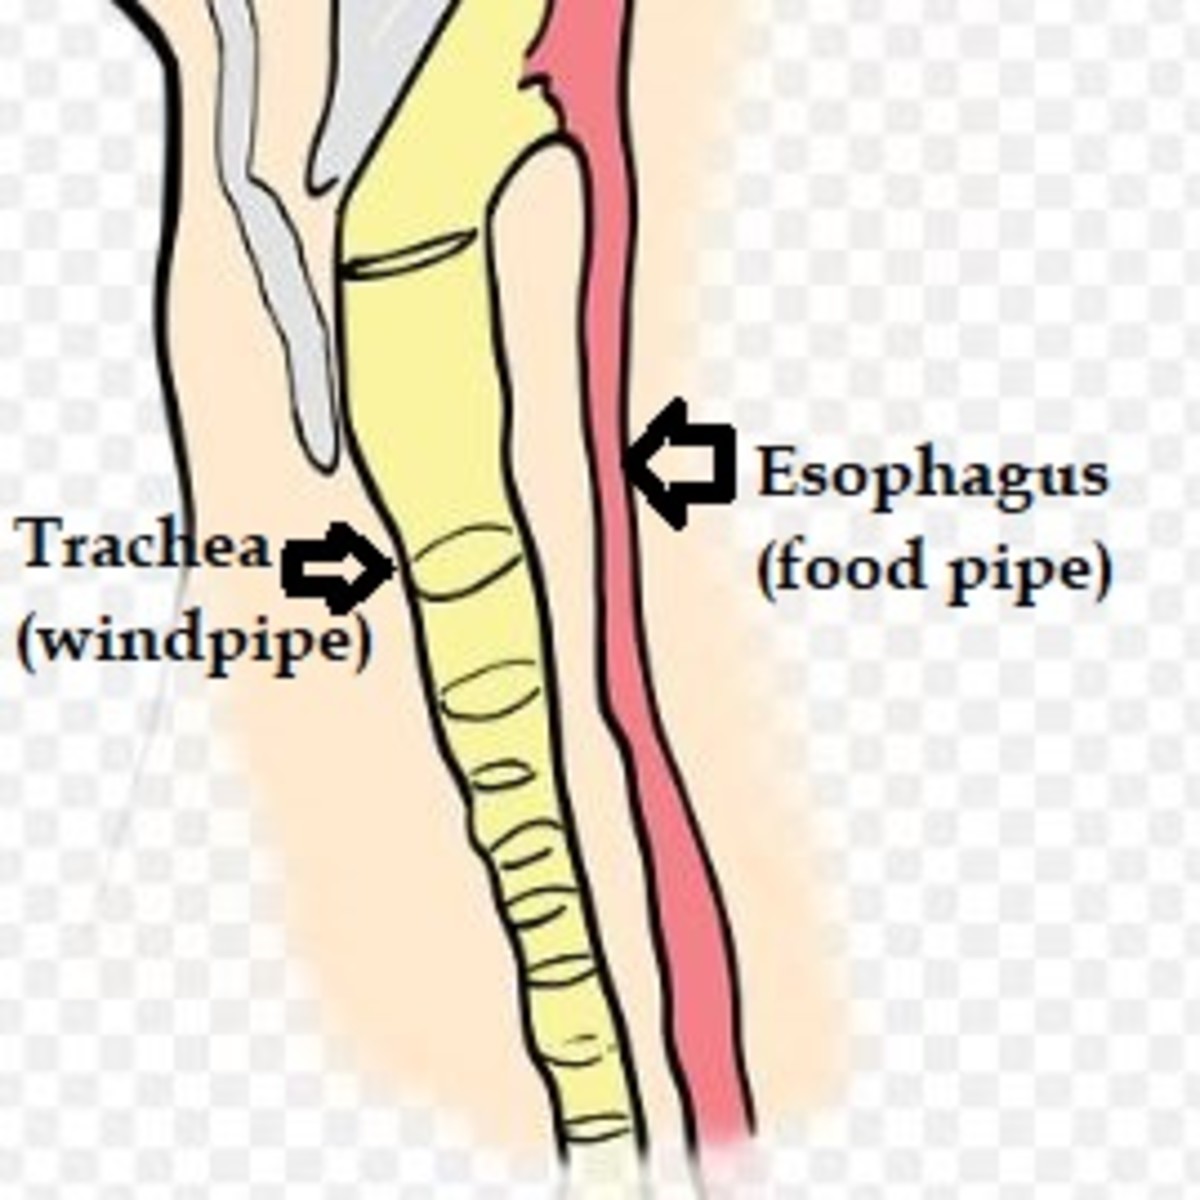  Esophagus anatomy (in this case not enlarged)